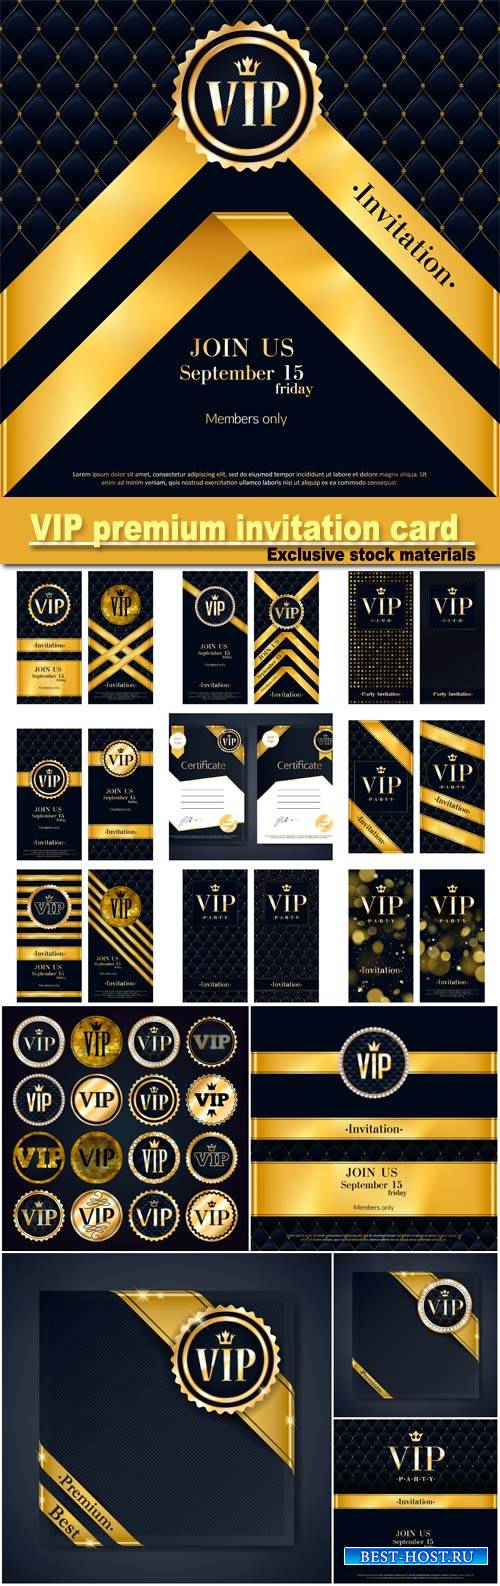 VIP party premium invitation card poster flyers set, black and golden design template, quilted pattern decorative background with gold ribbon and round badge